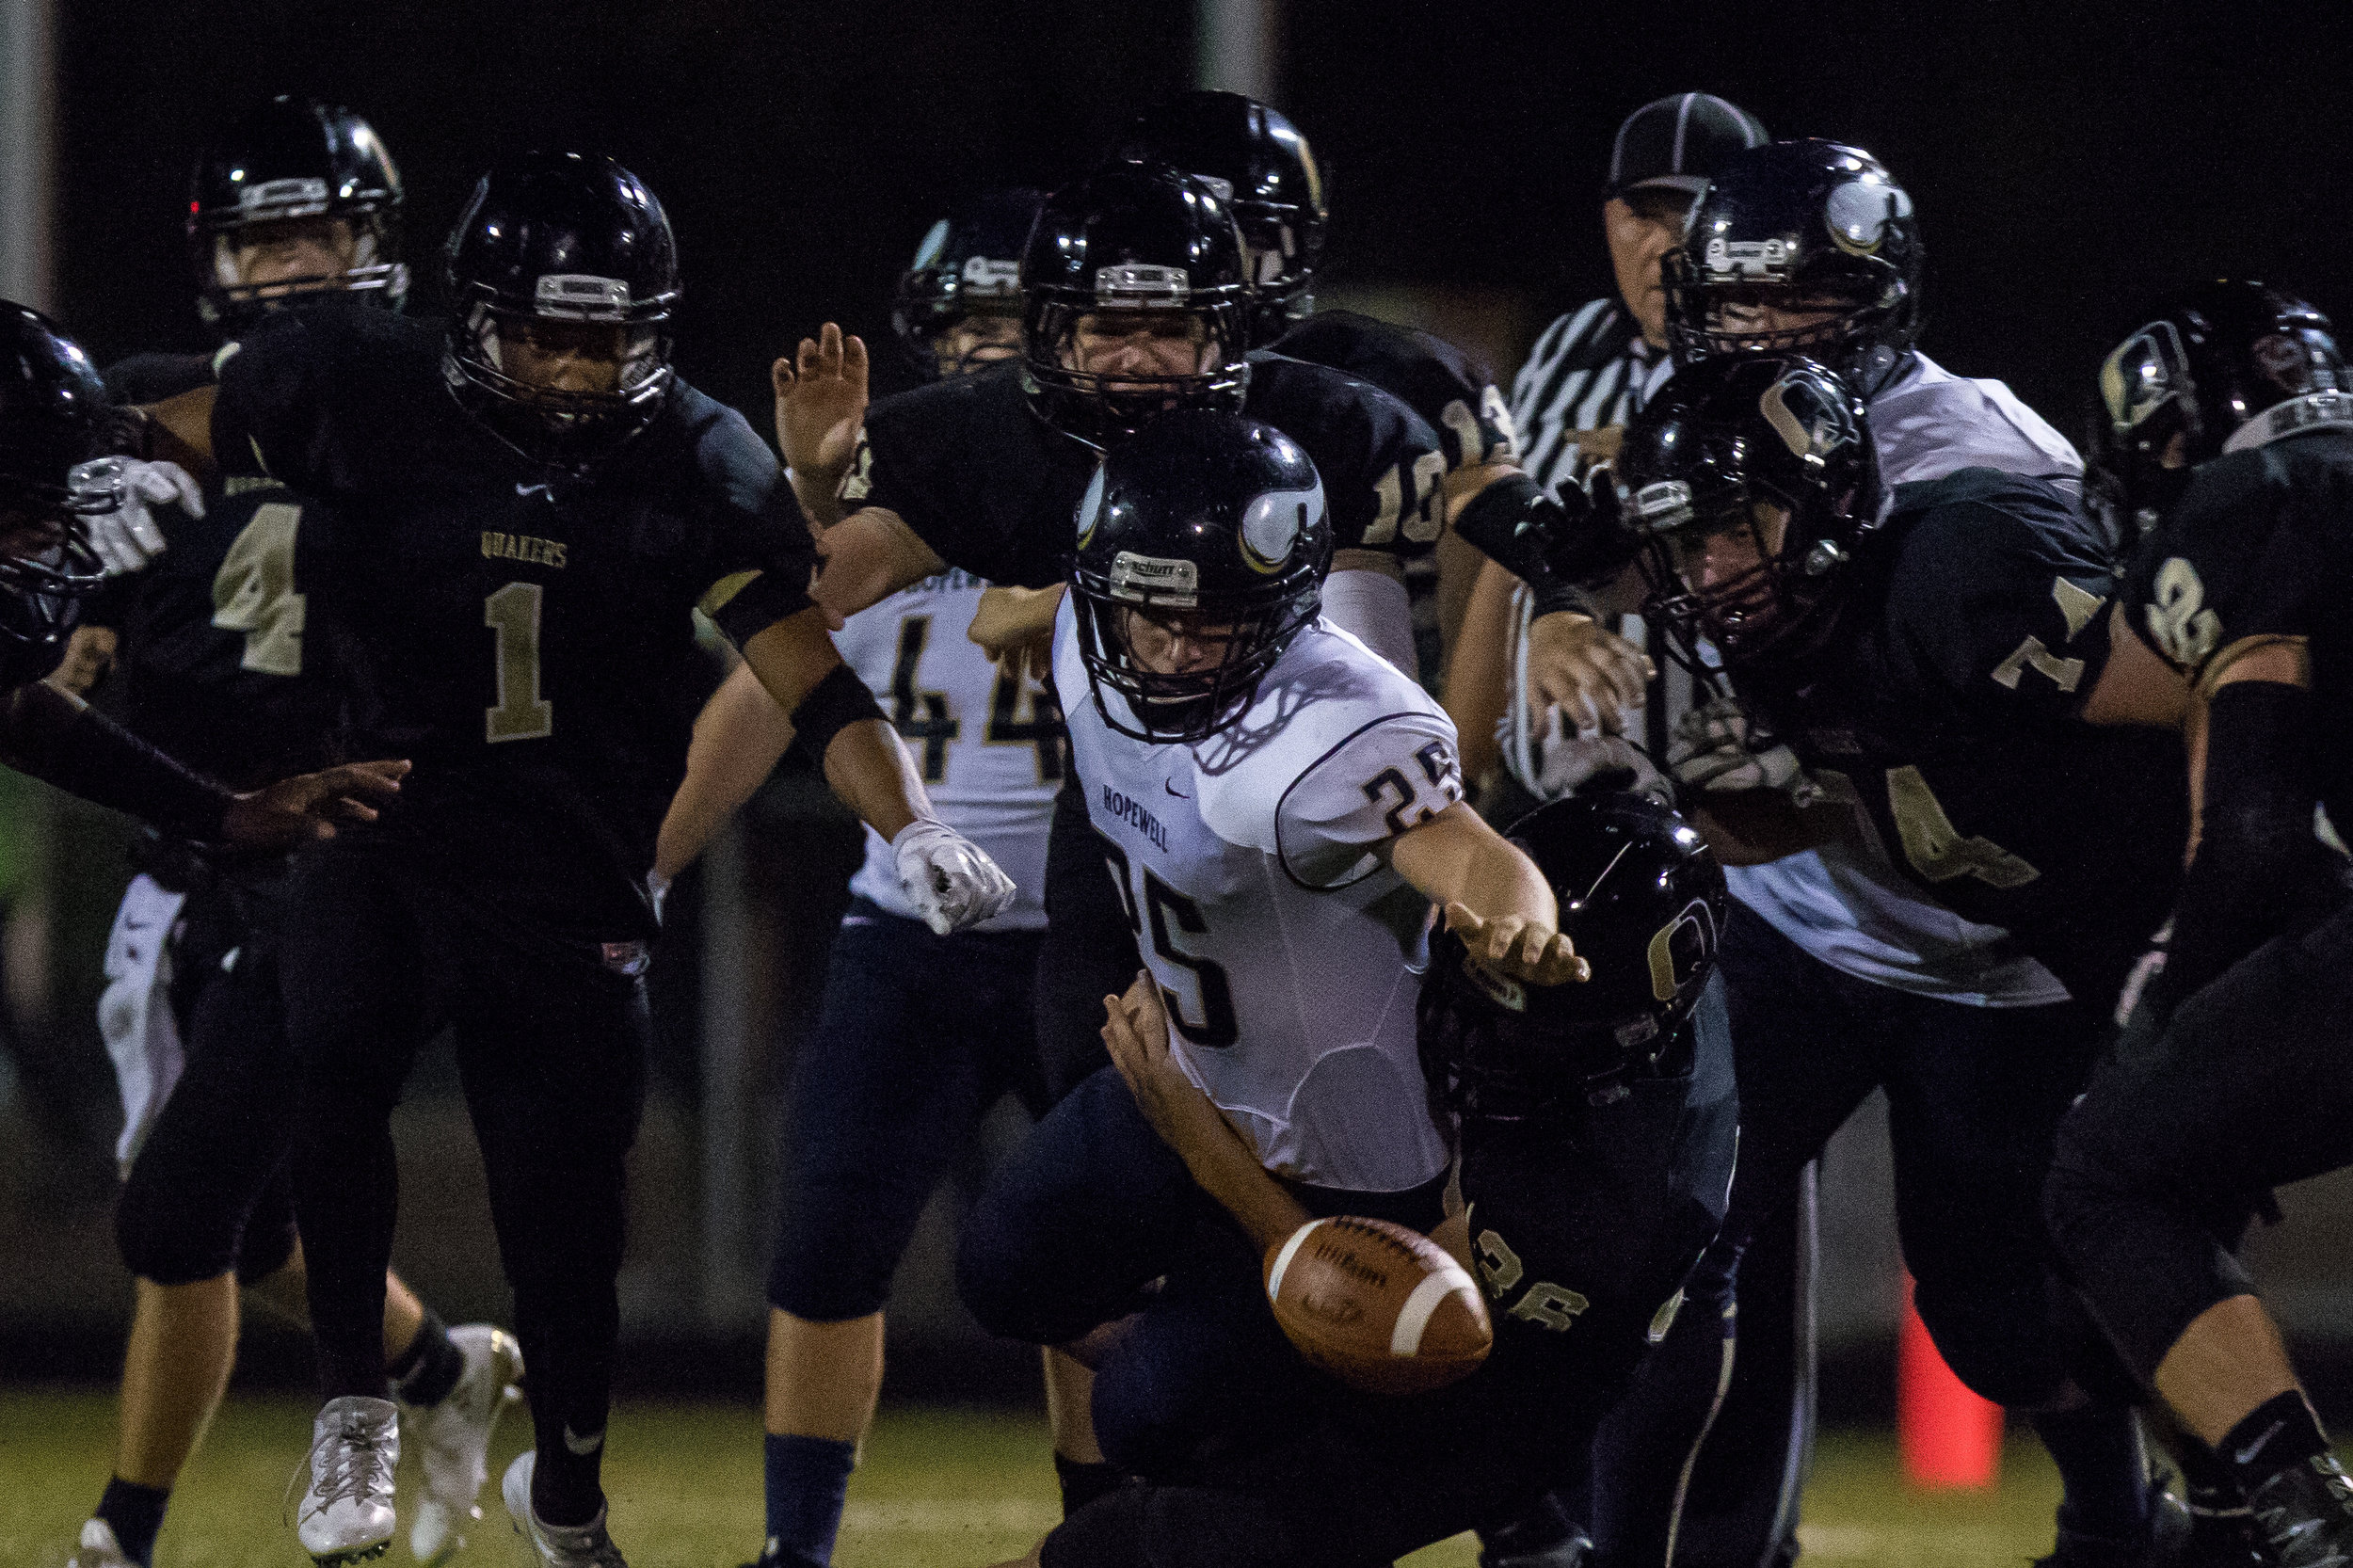  Hopewell's Daniel Wes Smith, 25 and Quaker Valley defenders all reach for a fumble caused by Quaker Valley during the second half of play at Quaker Valley on Friday evening. Quaker Valley beat Hopewell at home 31-14.  